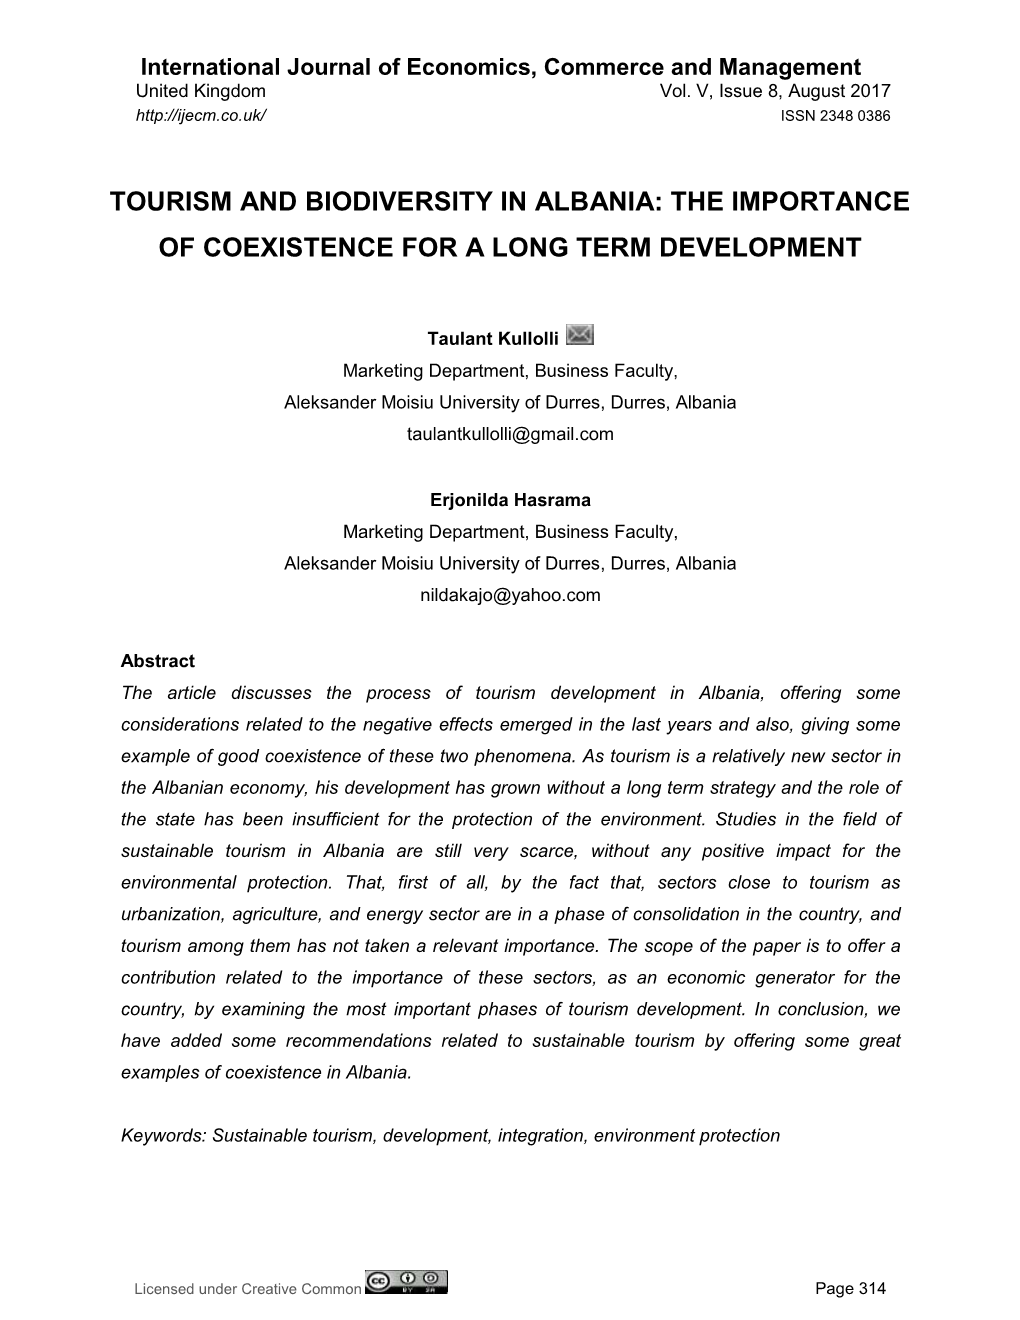 Tourism and Biodiversity in Albania: the Importance of Coexistence for a Long Term Development